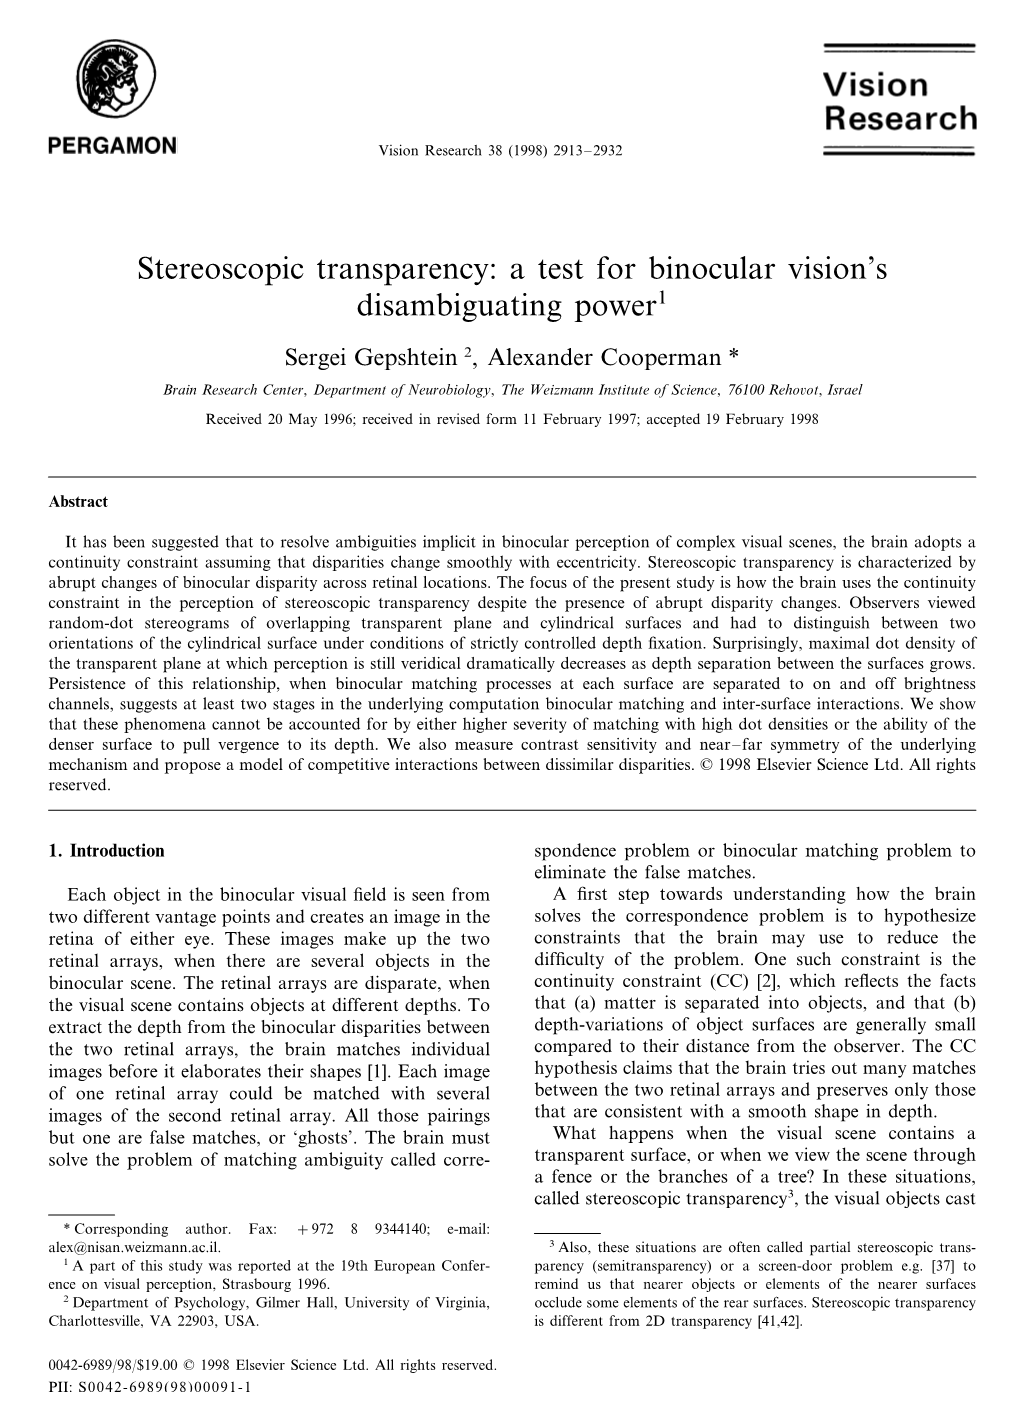 Stereoscopic Transparency: a Test for Binocular Vision's Disambiguating